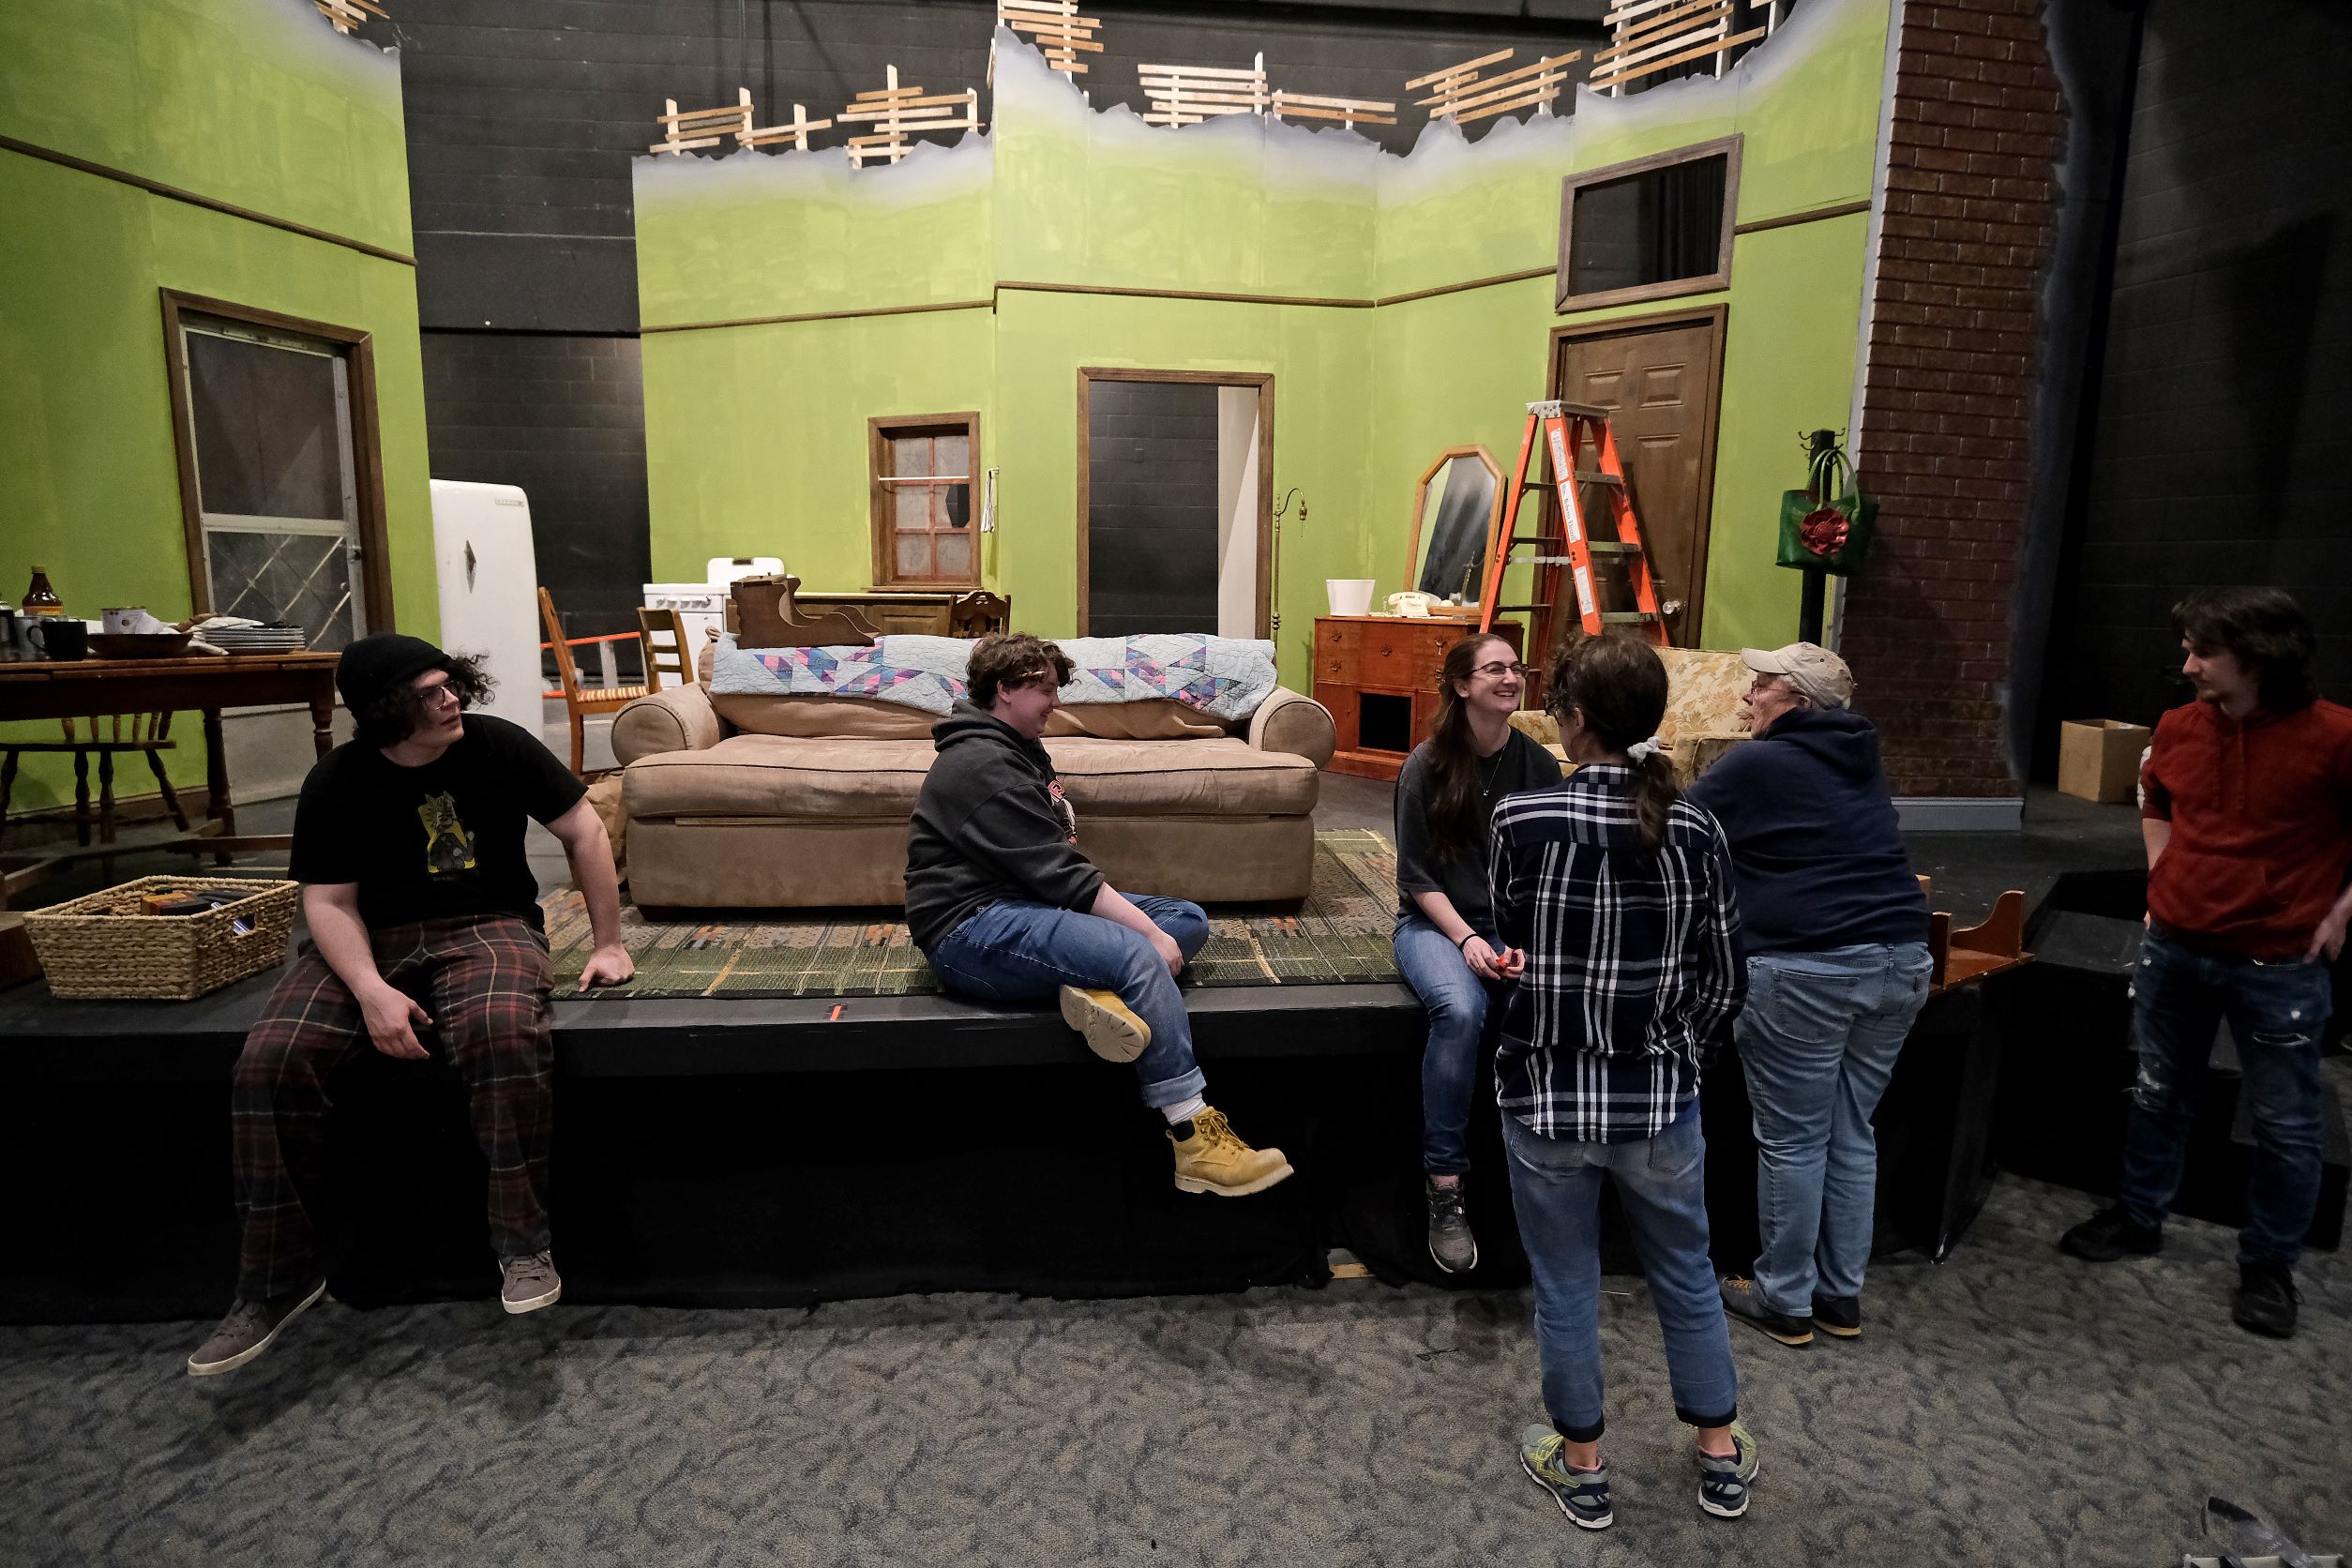 A Raisin in the Sun Stage Set-Up